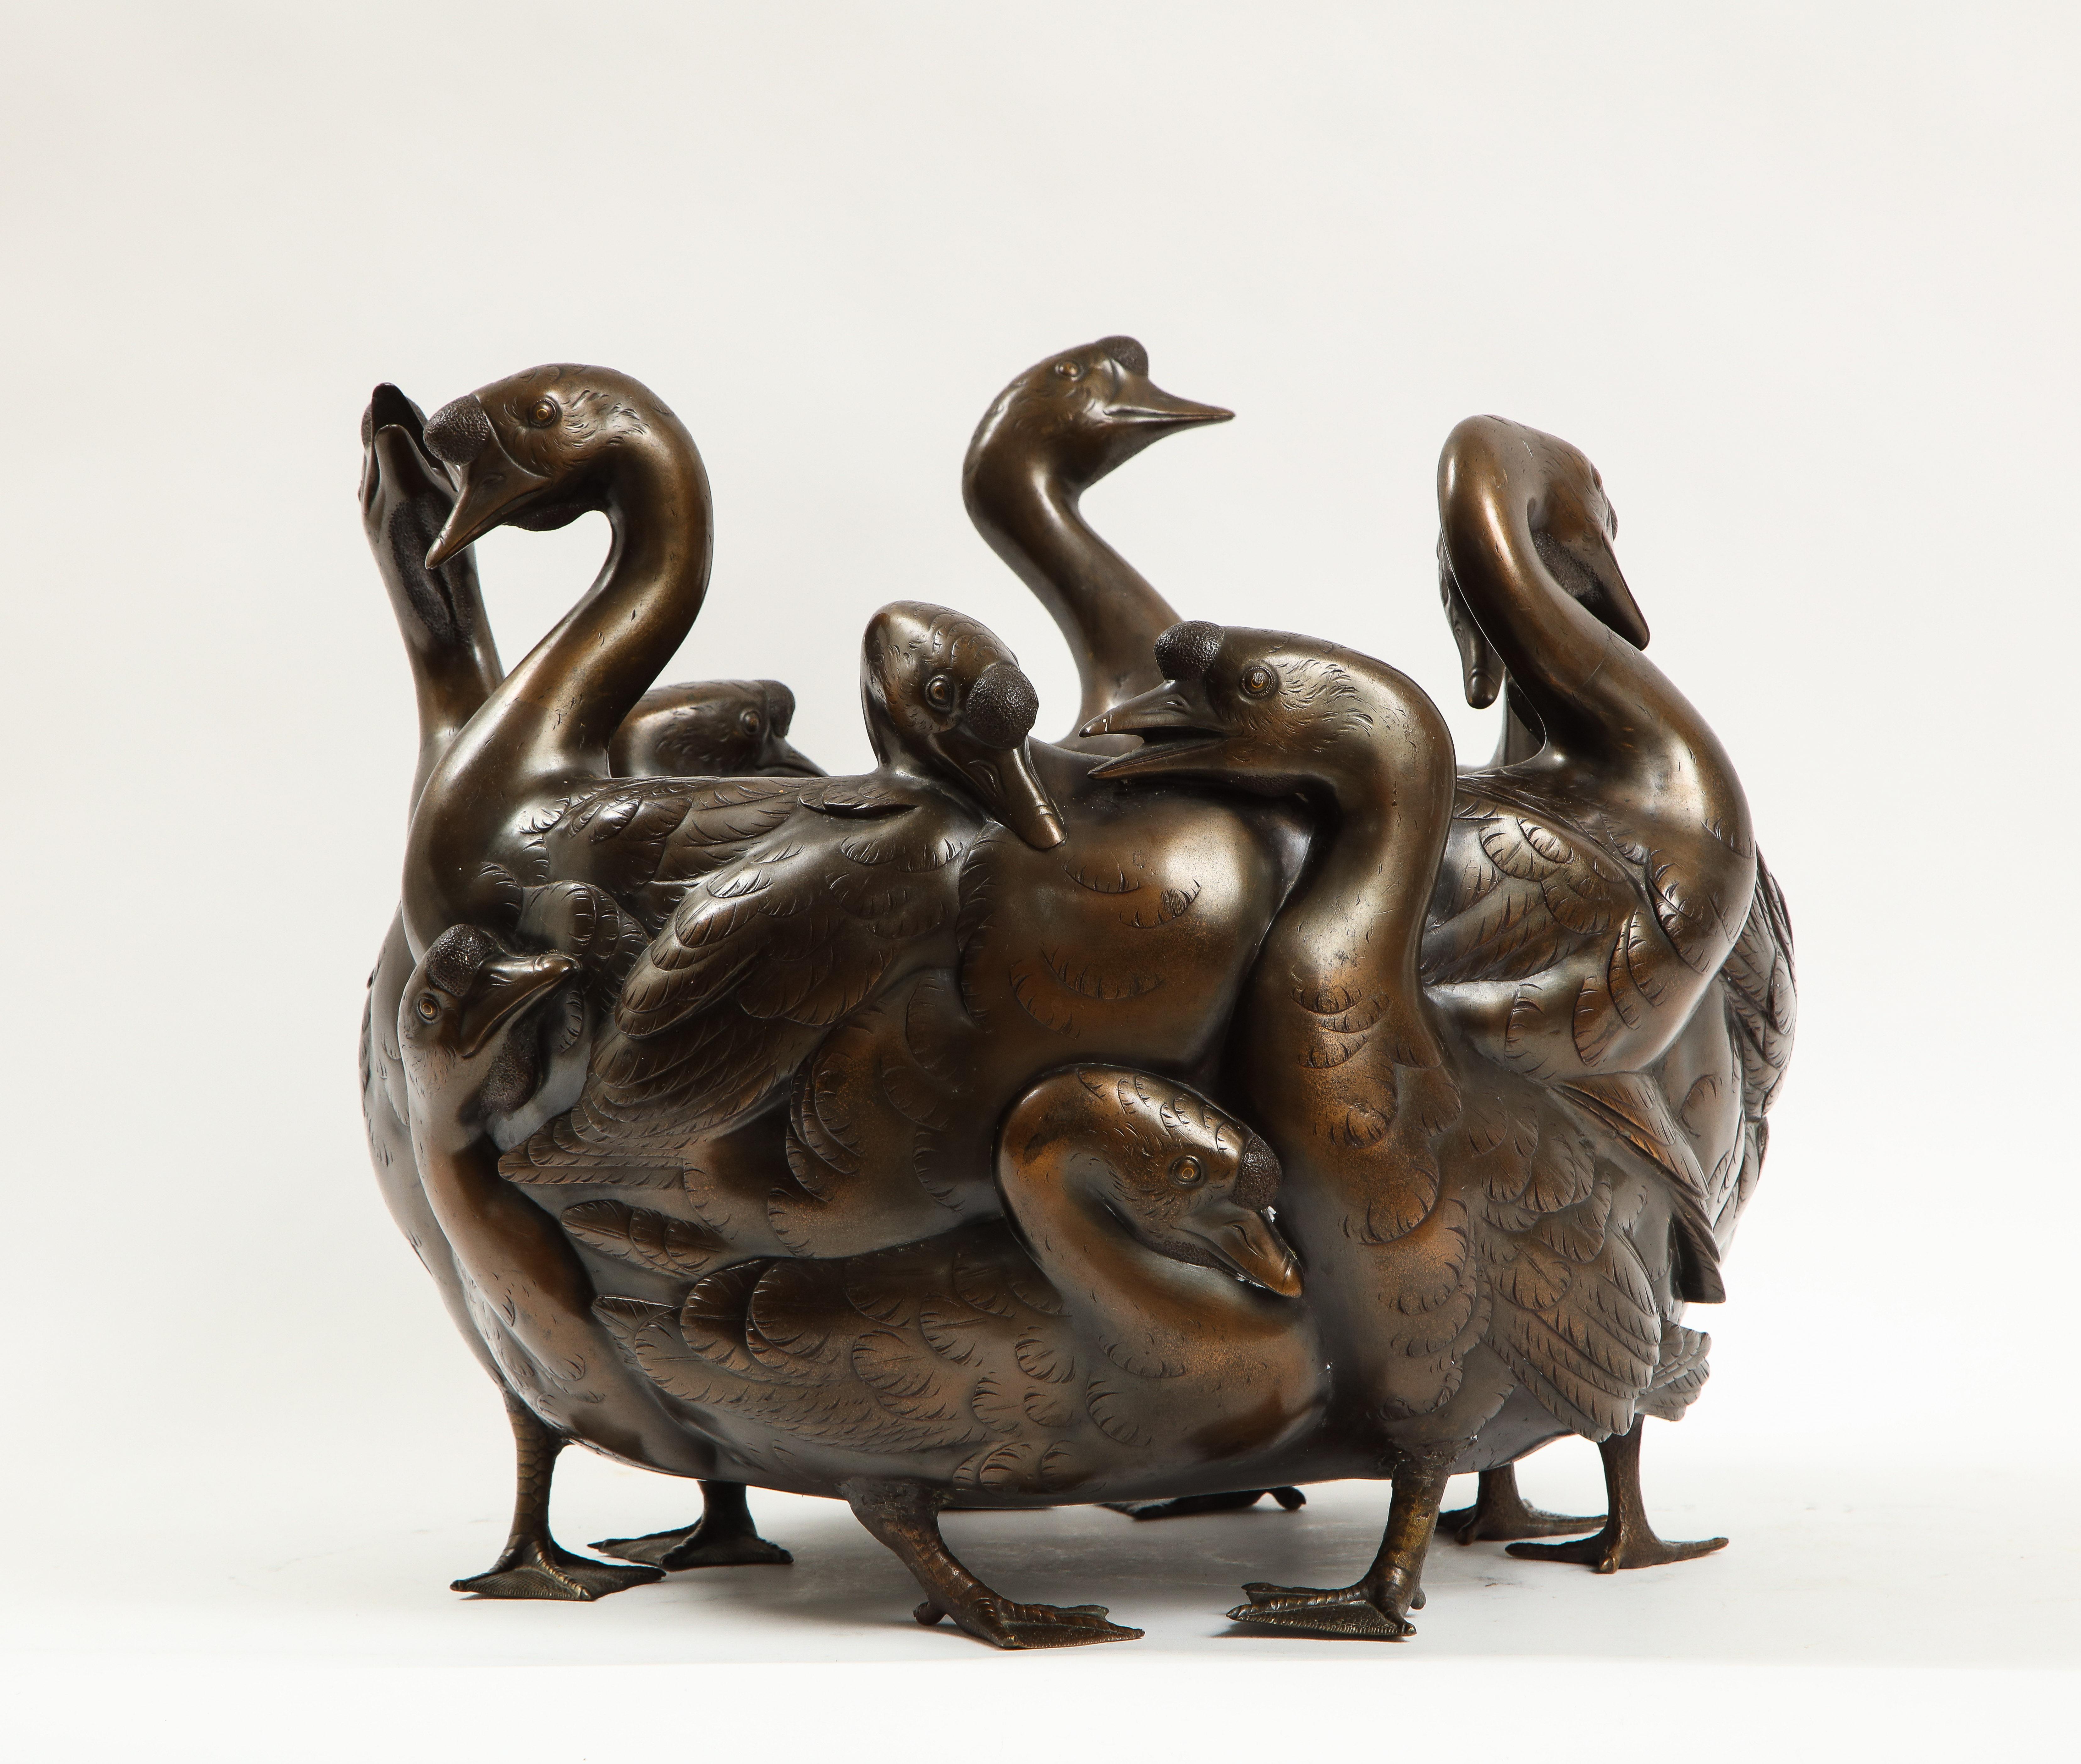 A very rare 19th/20th century Japanese bronze centerpiece of a flock of geese with heads cast in three dimensions, stamped and signed Gen Ryusai Seya. Each having gold inlaid eyes with all sections of their bodies hand-chassed with the finest